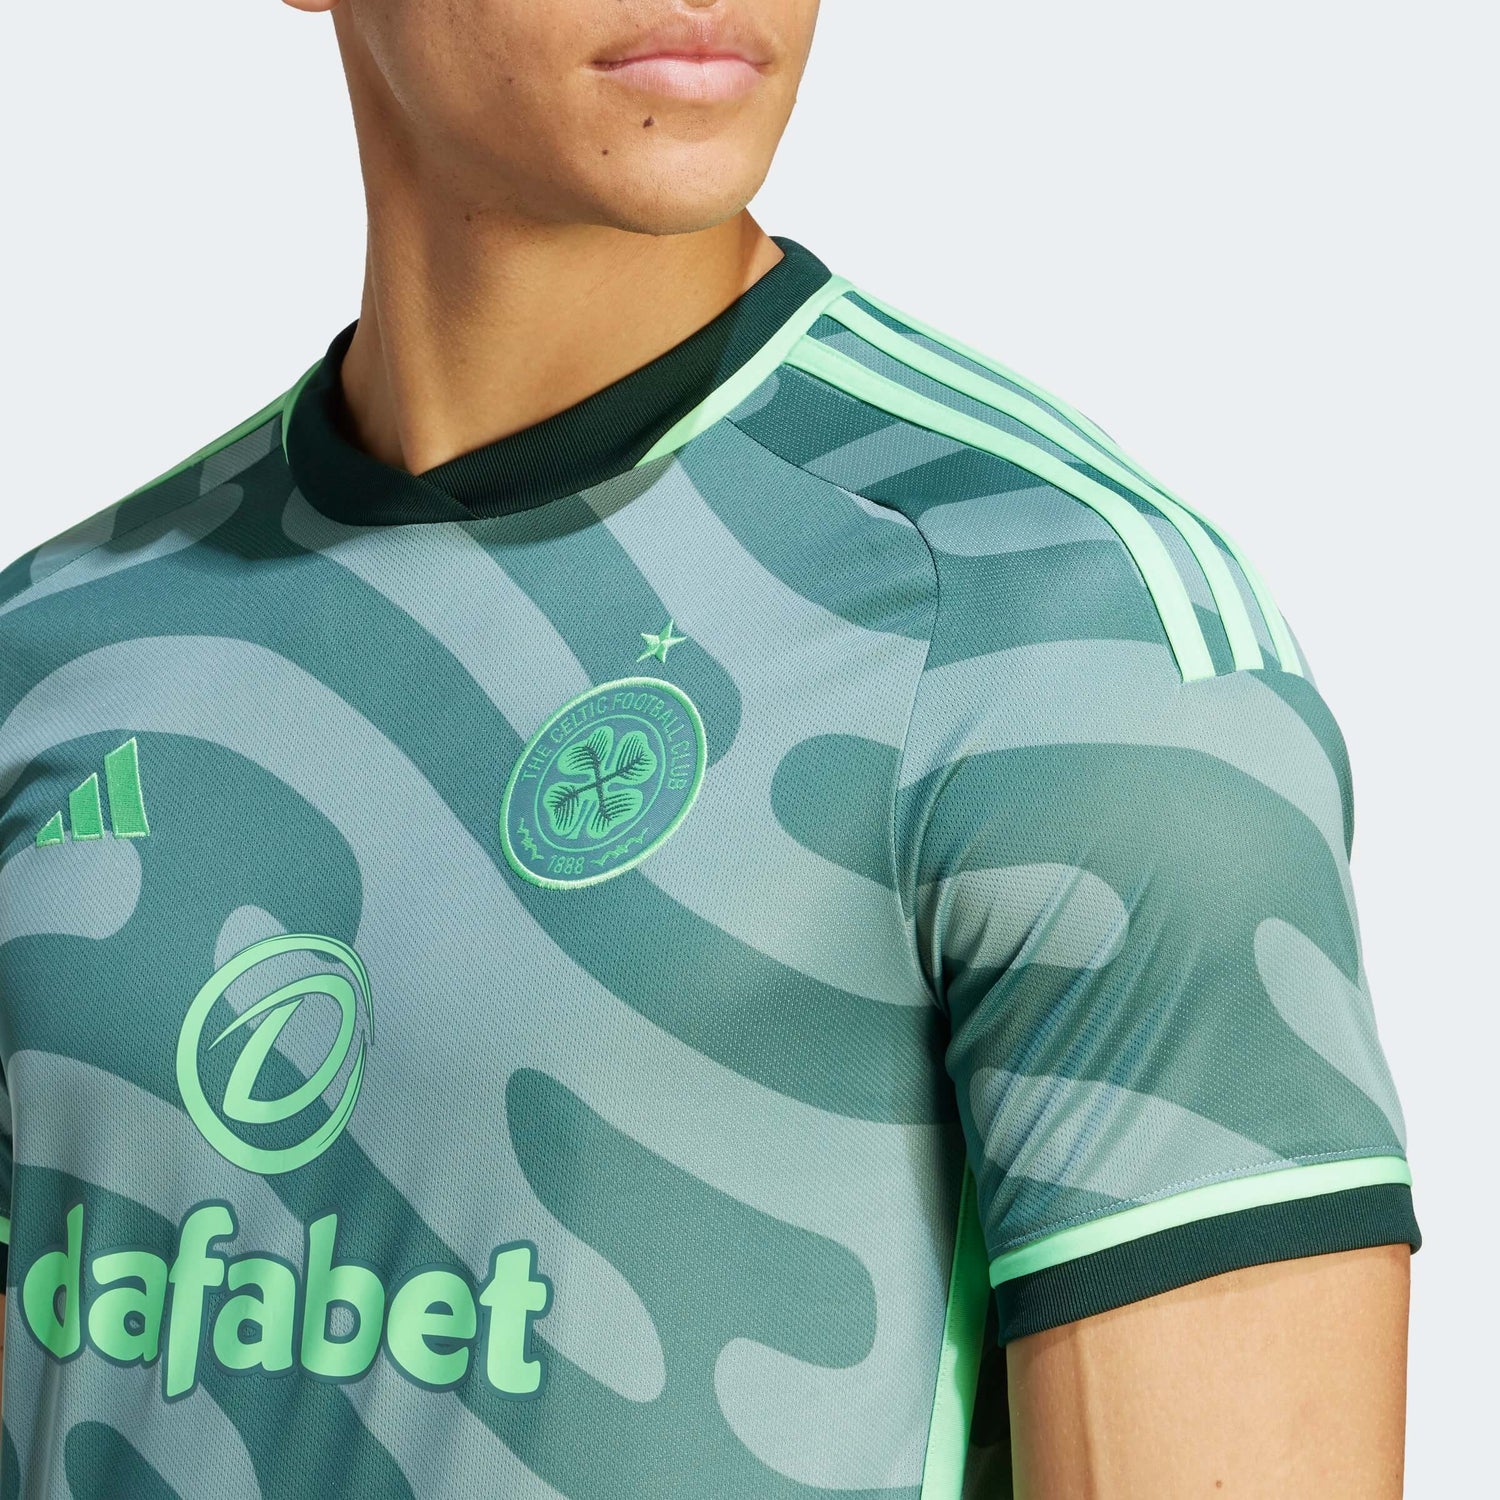 Adidas Celtic Mens 2023/24 Home Shirt with Long Sleeves